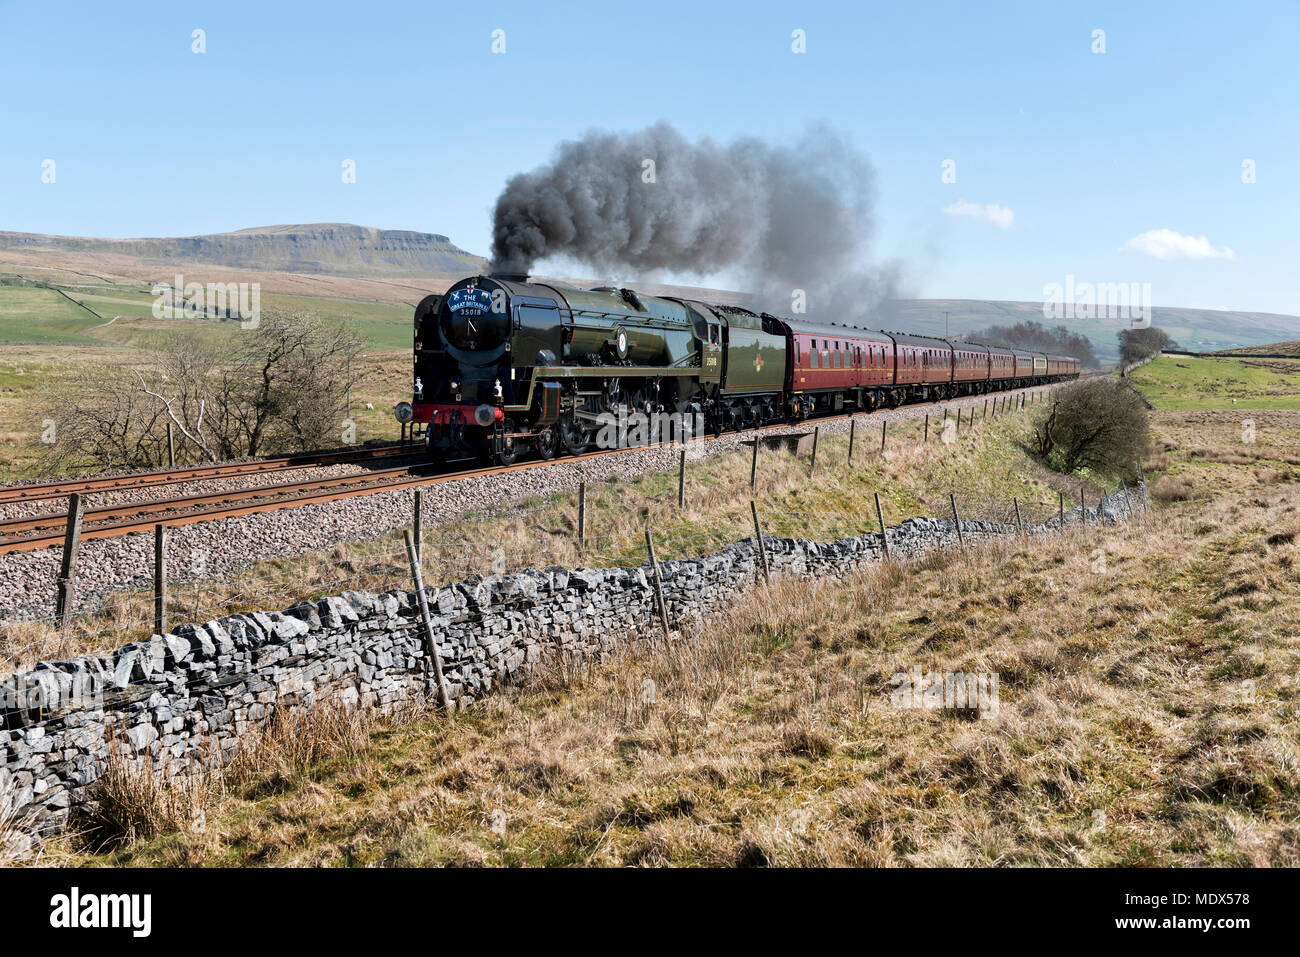 Ribblesdale, North Yorkshire, UK. 20th April 2018. Steam locomotive 'British India Line' hauls The Great Britain XI round the UK rail tour. Seen here on the tour section between York and Carlisle at Selside, in Ribblesdale, on the Settle-Carlisle railway line, 20th April 2018. Built for the Southern Railway in 1945 British India Line is one of the Merchant Navy class locos, all of which were named after shipping lines. The locomotive has been recently restored. In the background is Pen-y-ghent peak in the Yorkshire Dales National Park. Credit: John Bentley/Alamy Live News Stock Photo